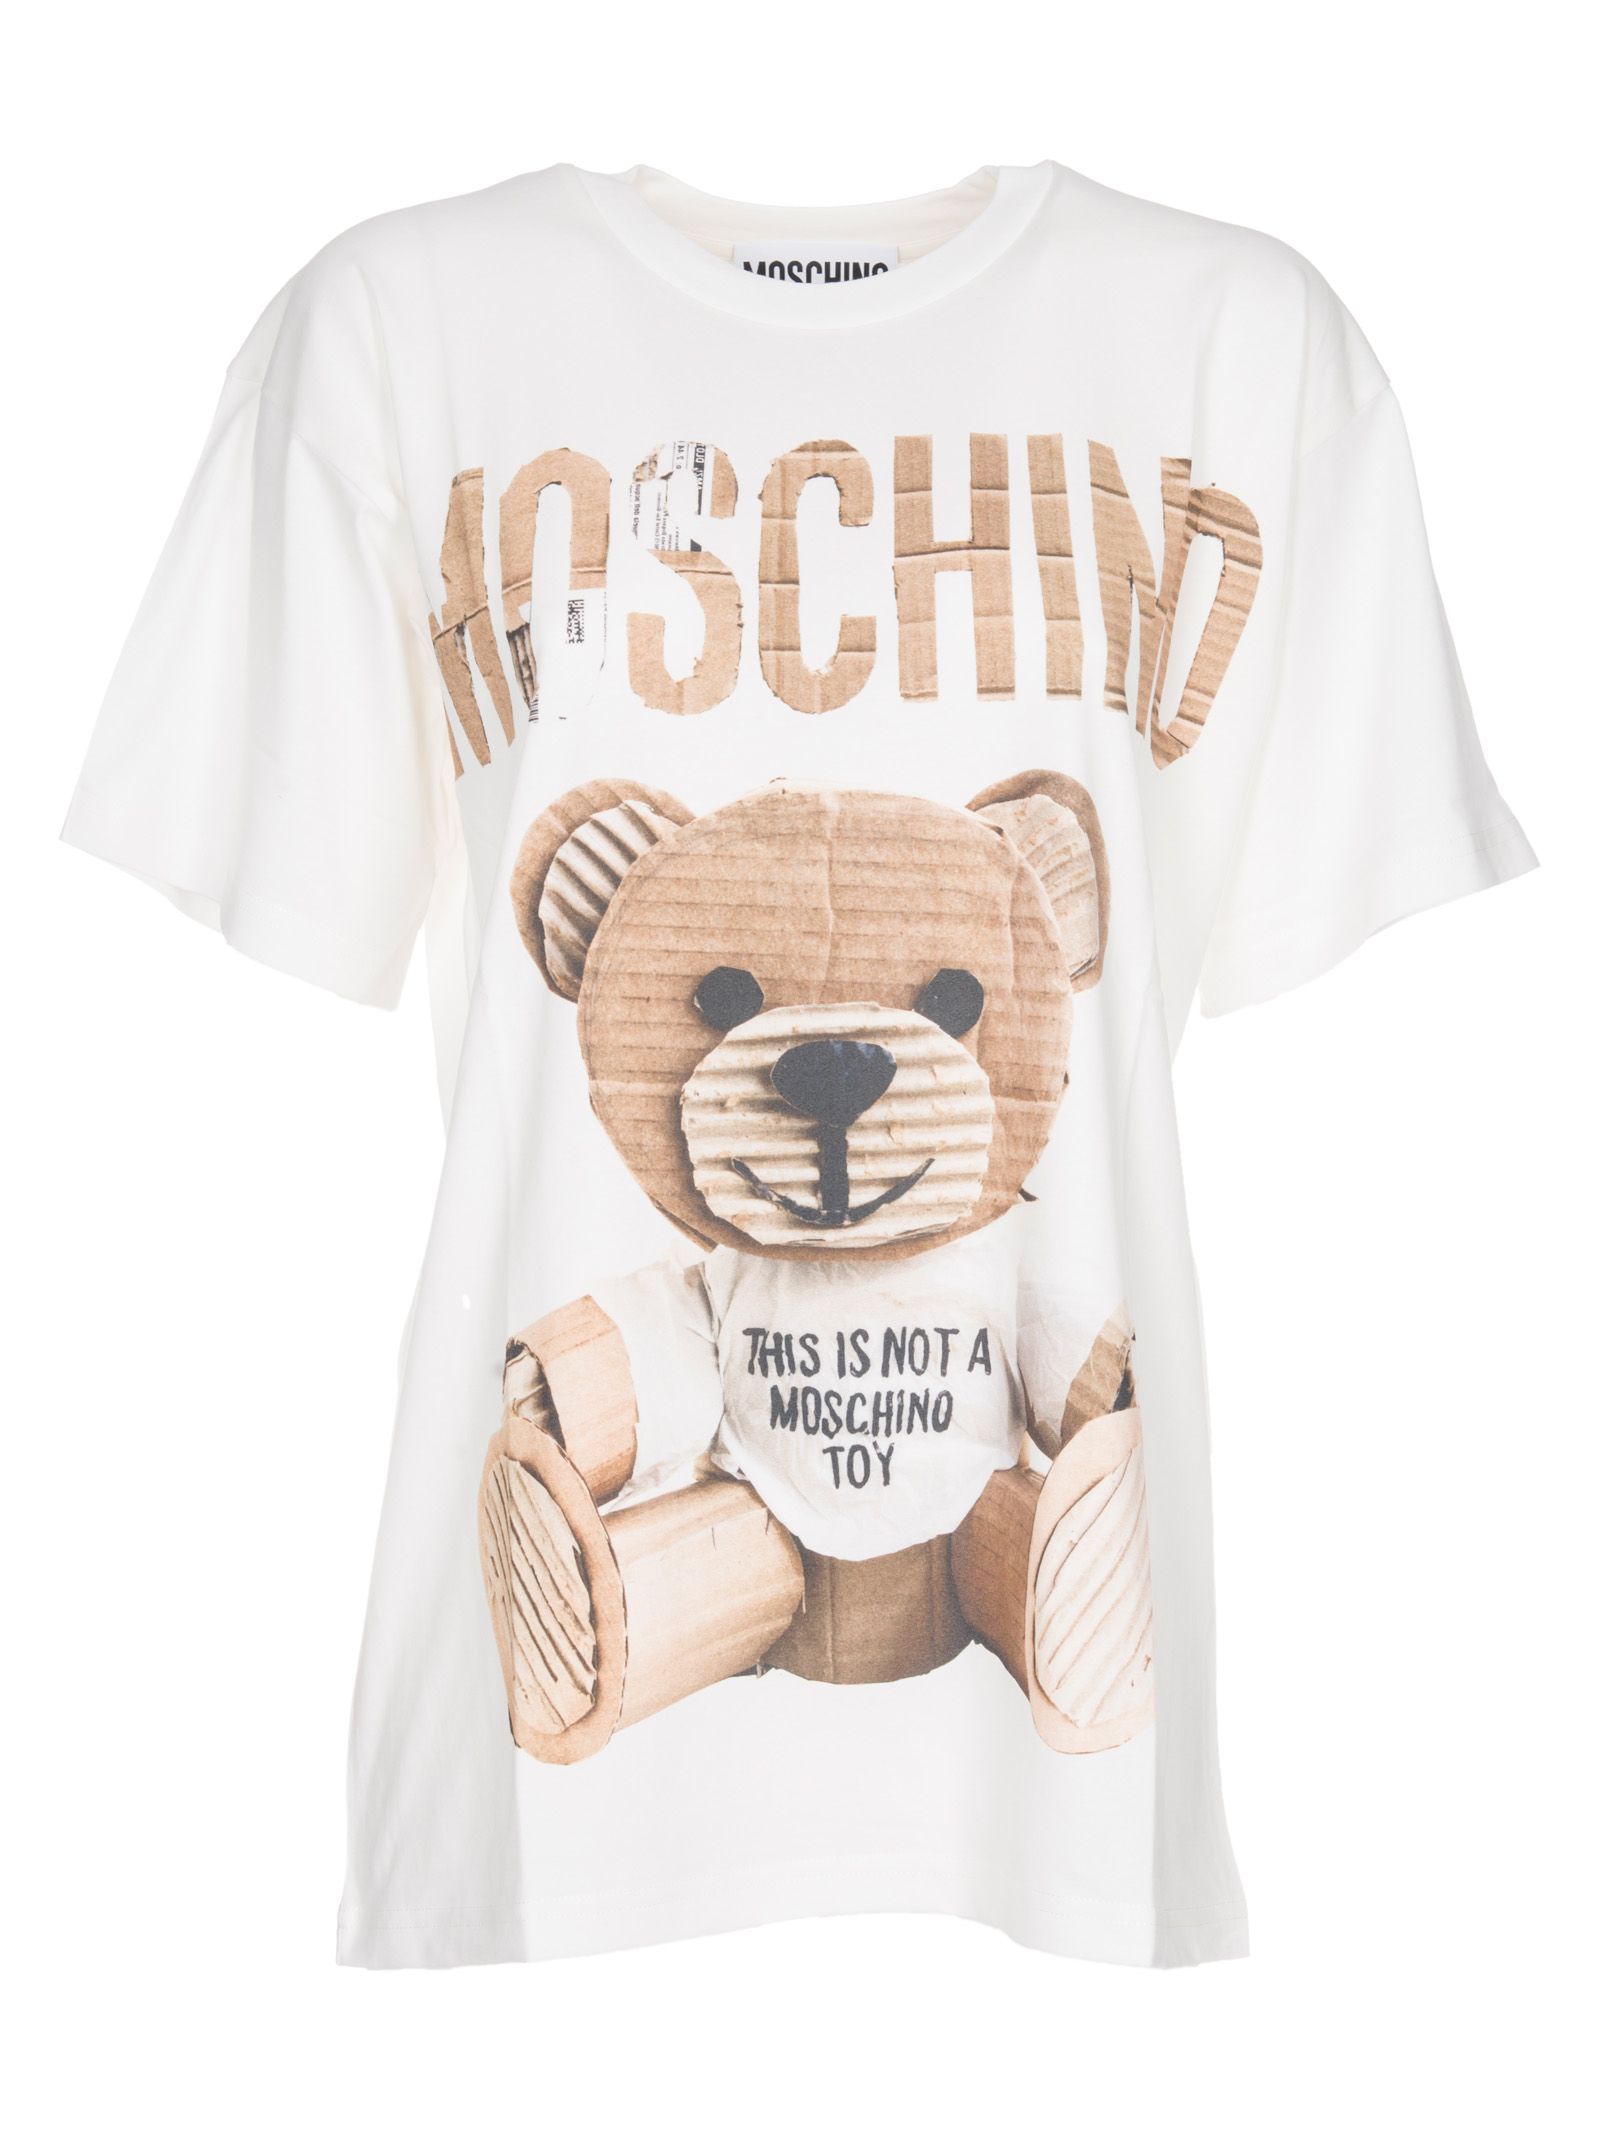 Year olds moschino t shirt womens teddy bear online india